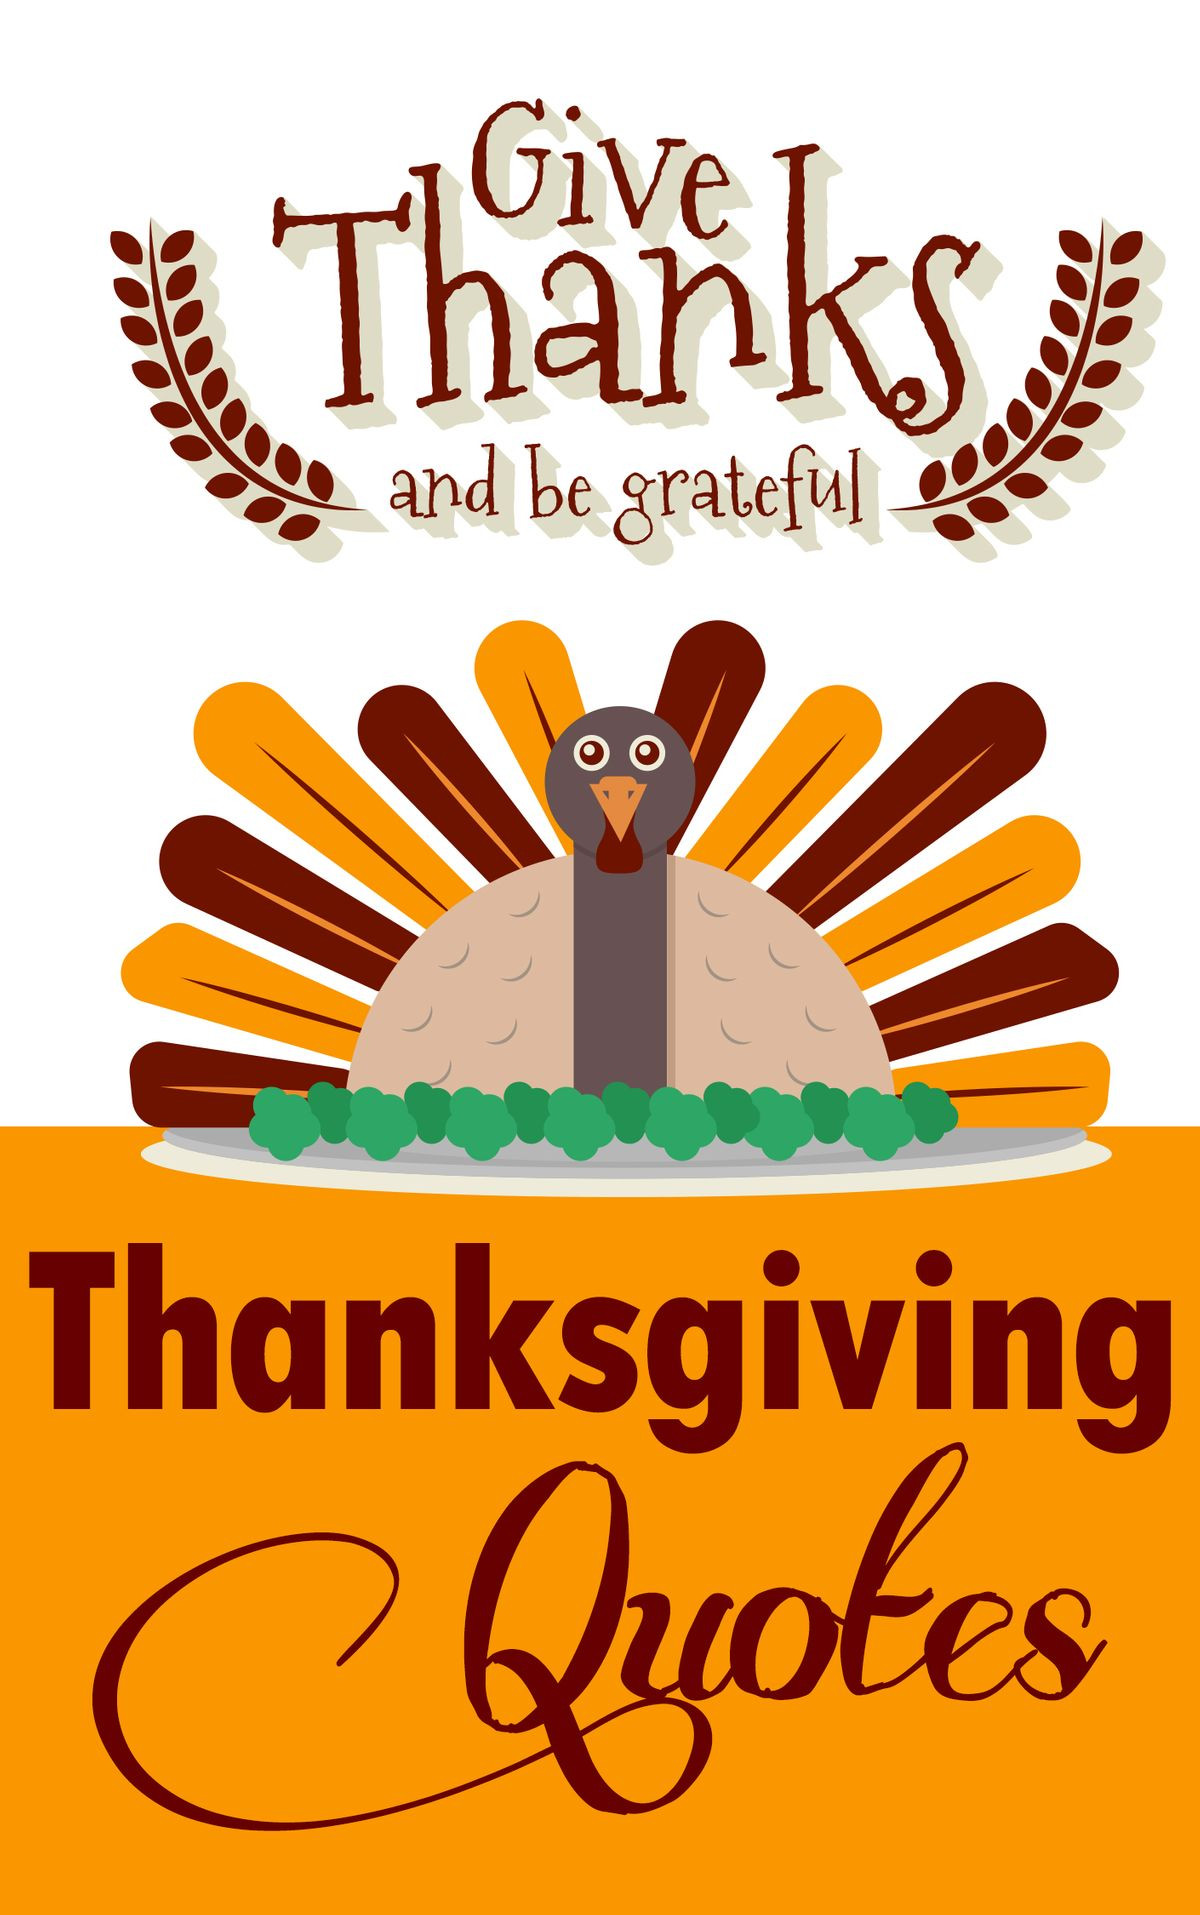 Grateful Thanksgiving Quotes
 Thanksgiving Quotes Give Thanks And Be Grateful